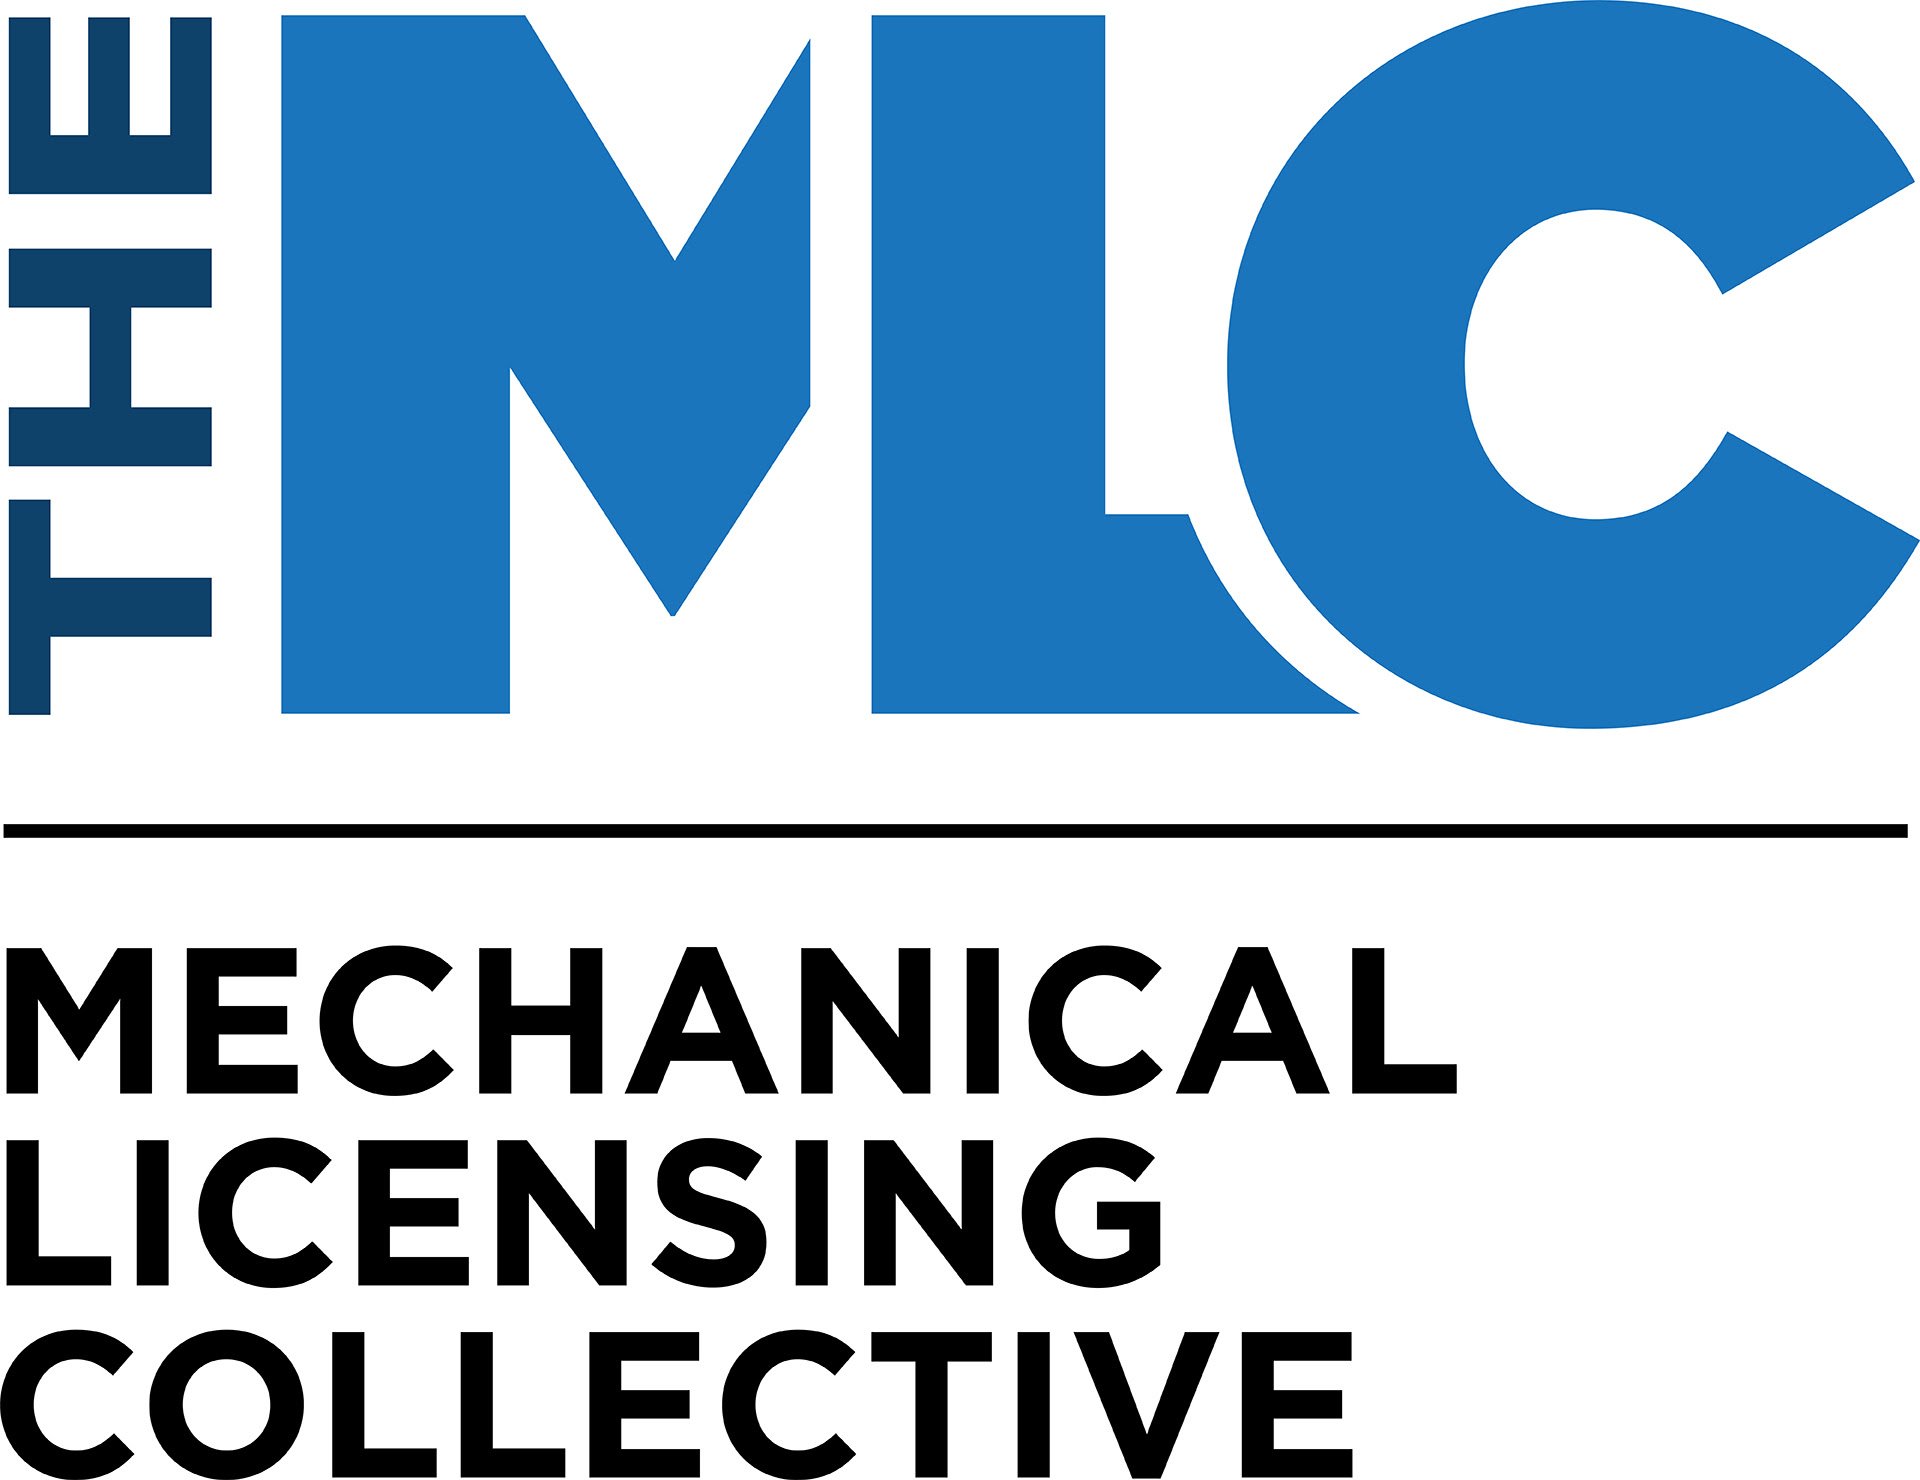 The Mechanical Licensing Collective (MLC) - a nonprofit organisation established under the Music Modernization Act of 2018